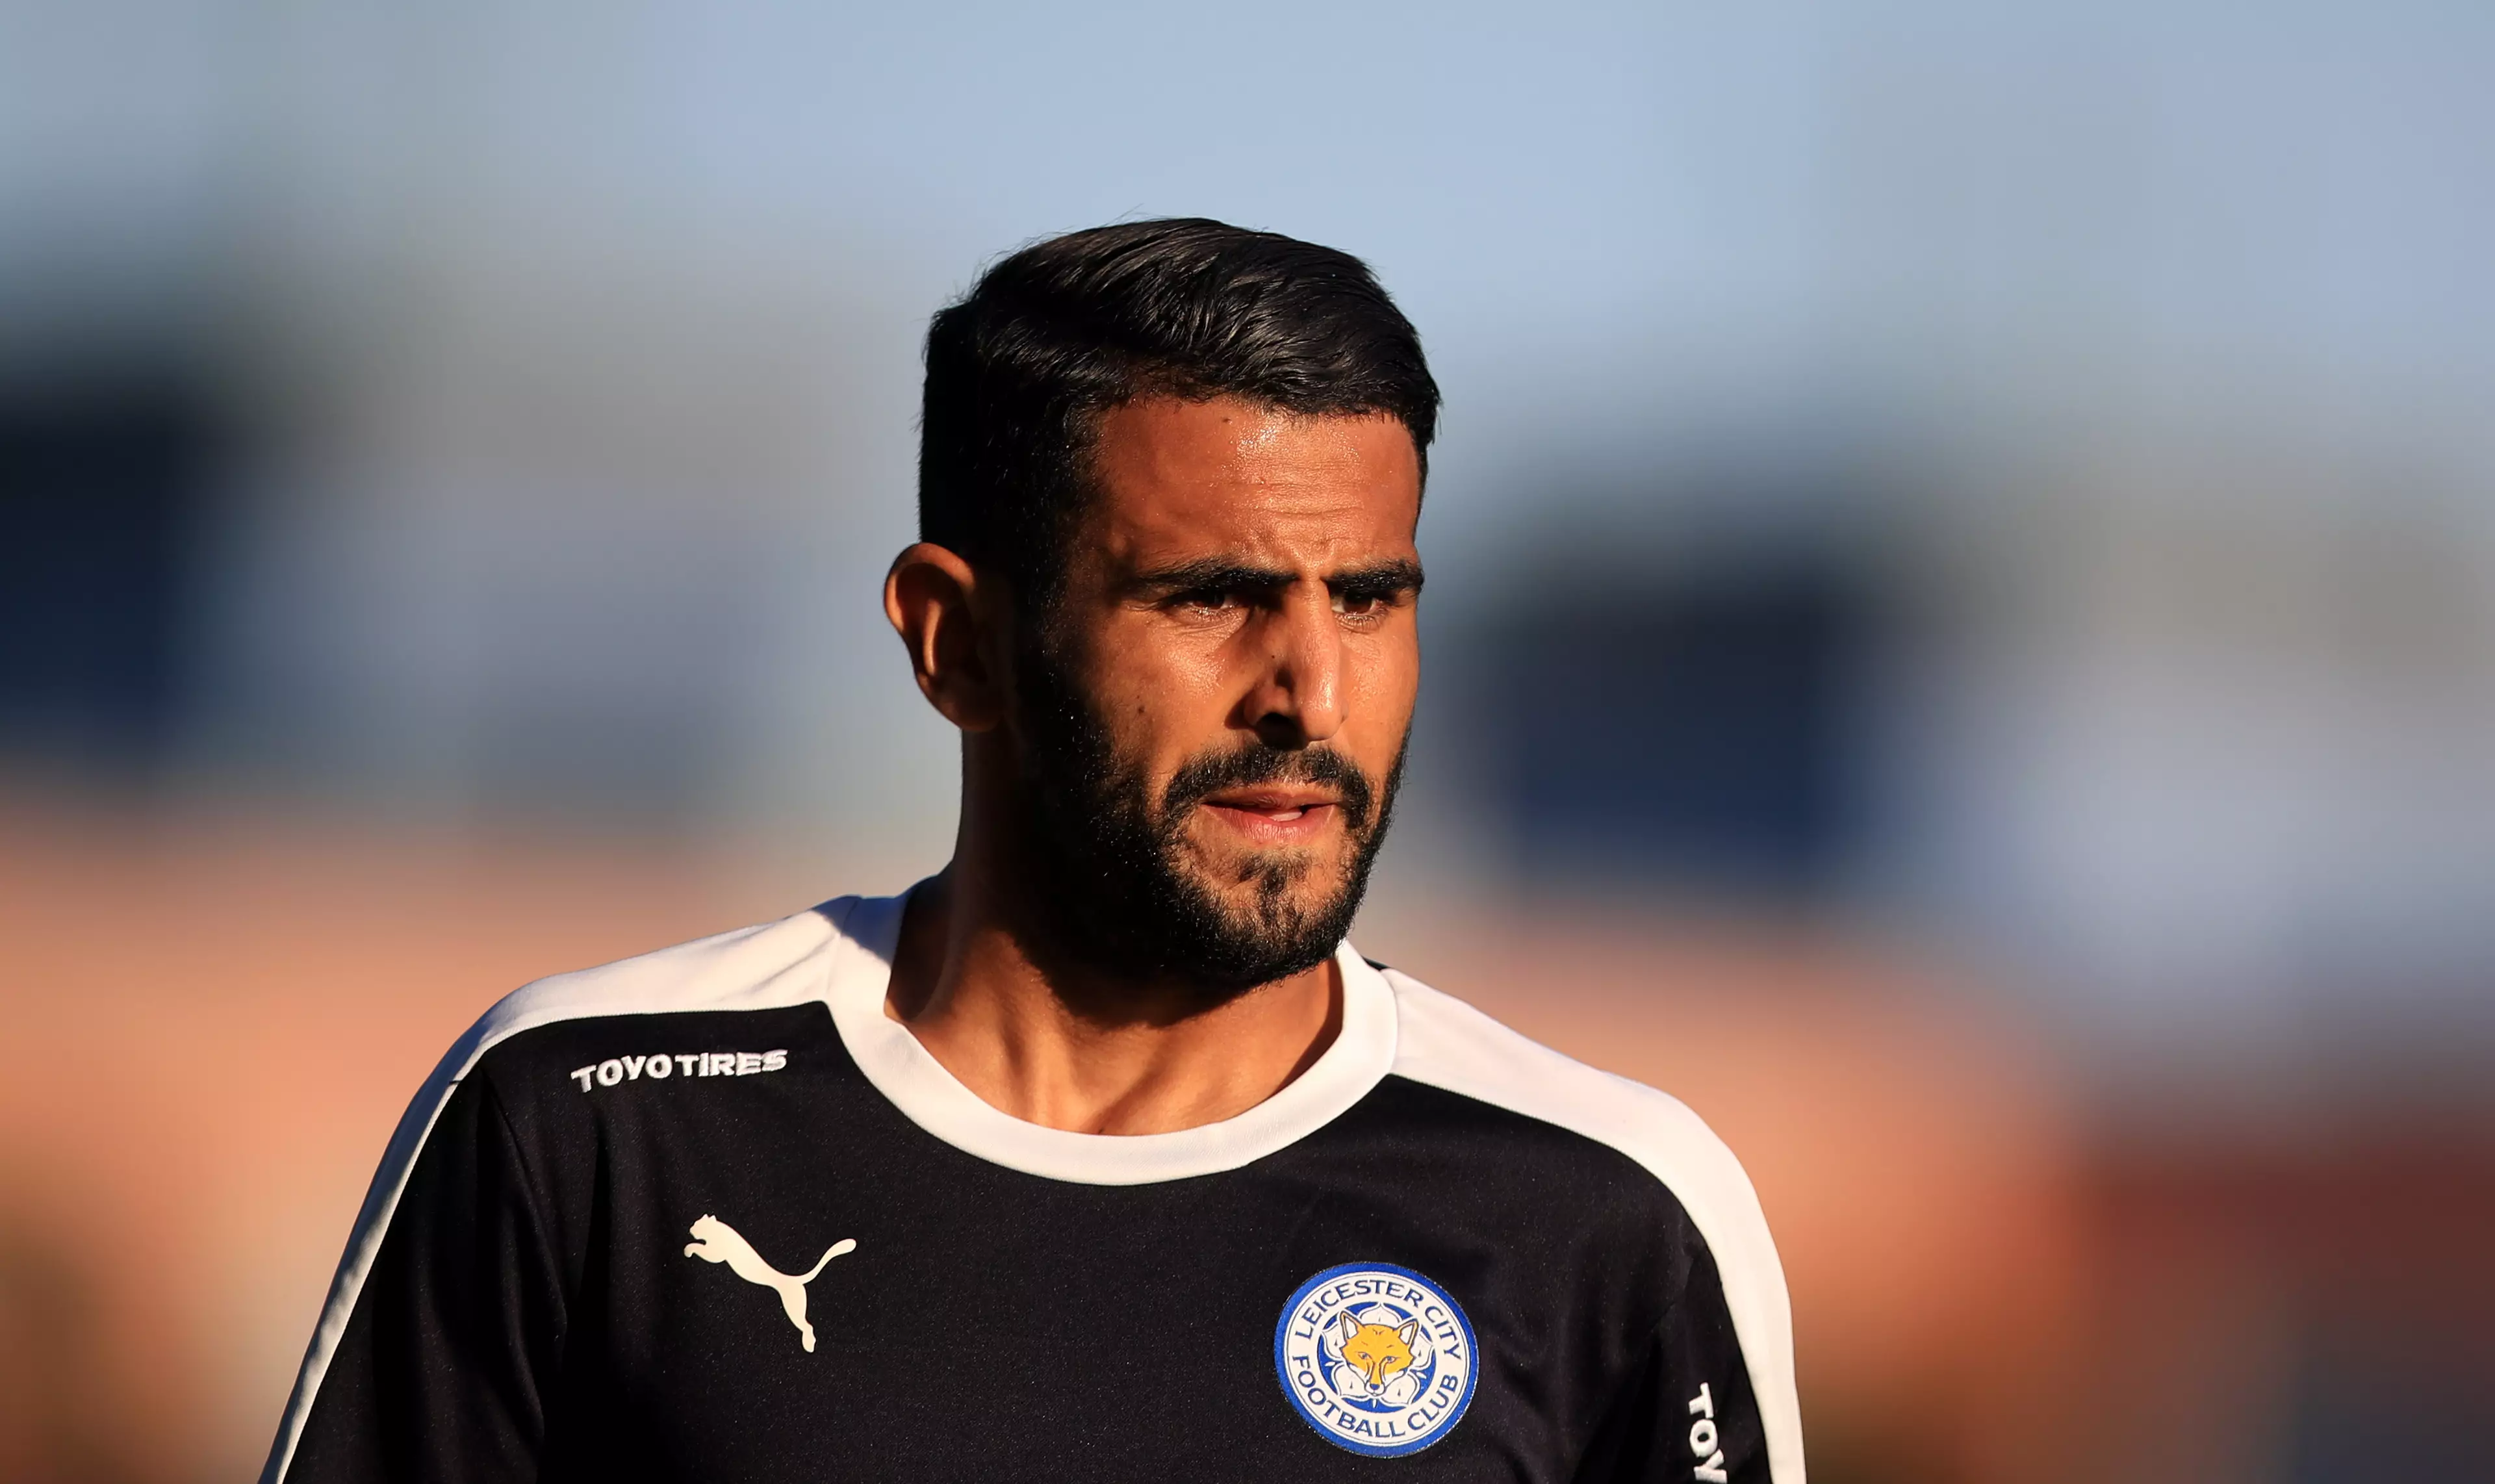 BREAKING: Riyad Mahrez Agrees Move Away From Leicester